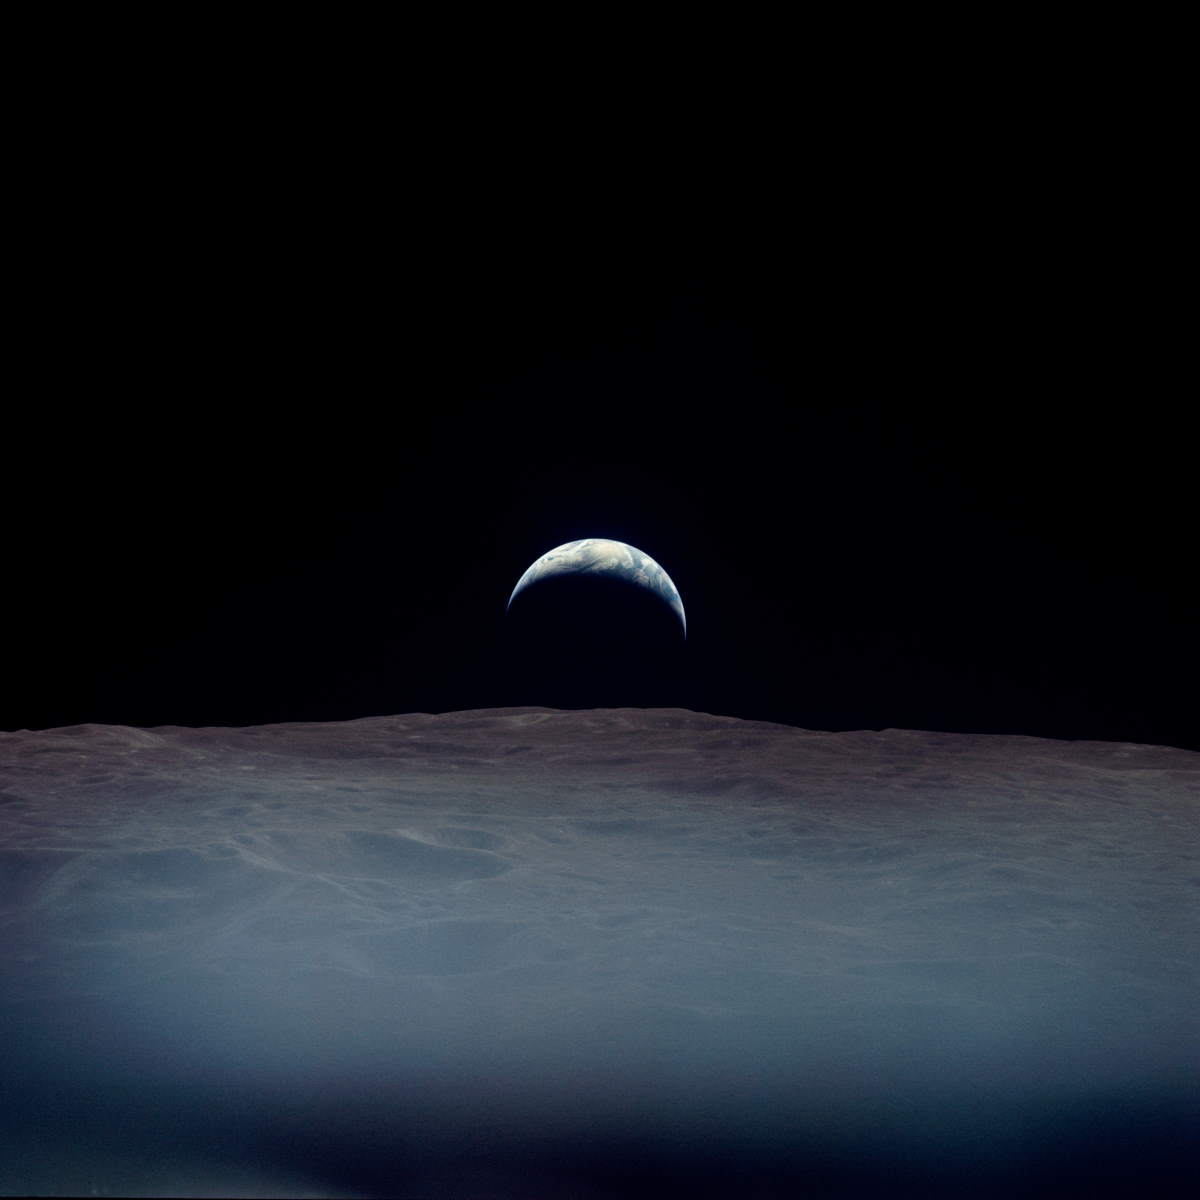 Earth rises just west of Crater Pasteur - Apollo 12 image